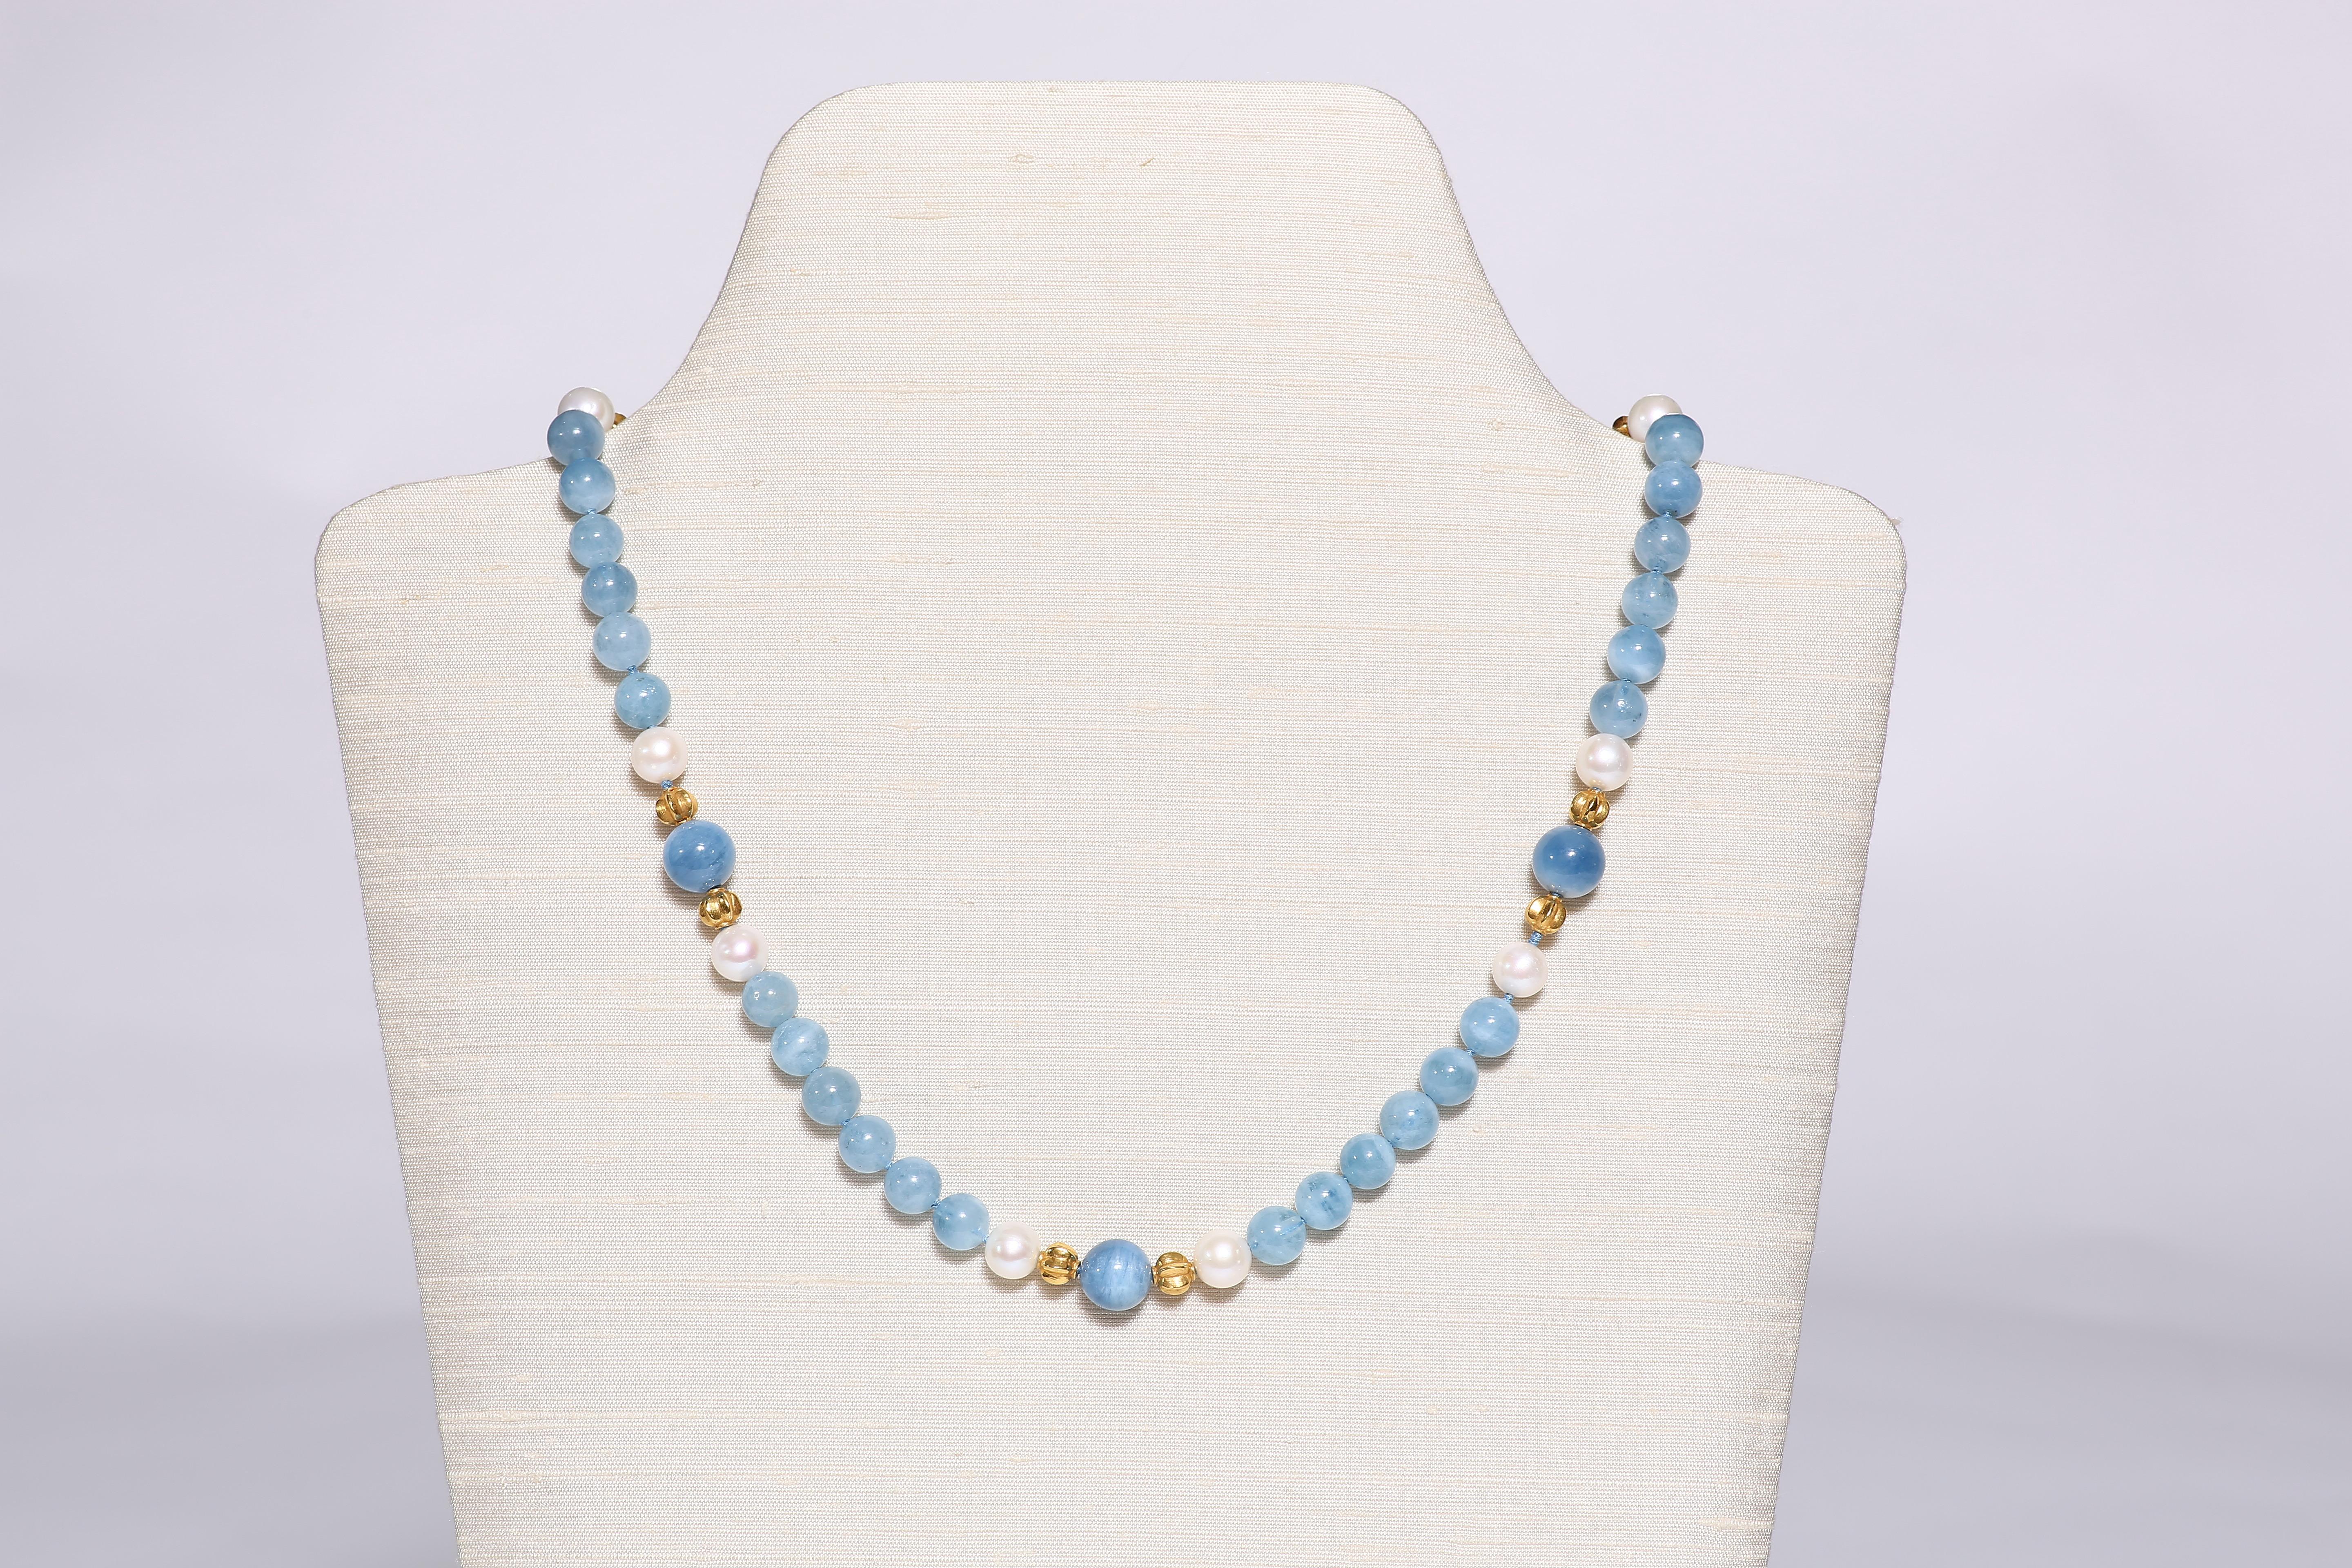 Round calming blue aquamarine beads; in two sizes, are accentuated by 18k gold beads and fresh water pearls.  A charming classic necklace of 21 1/2